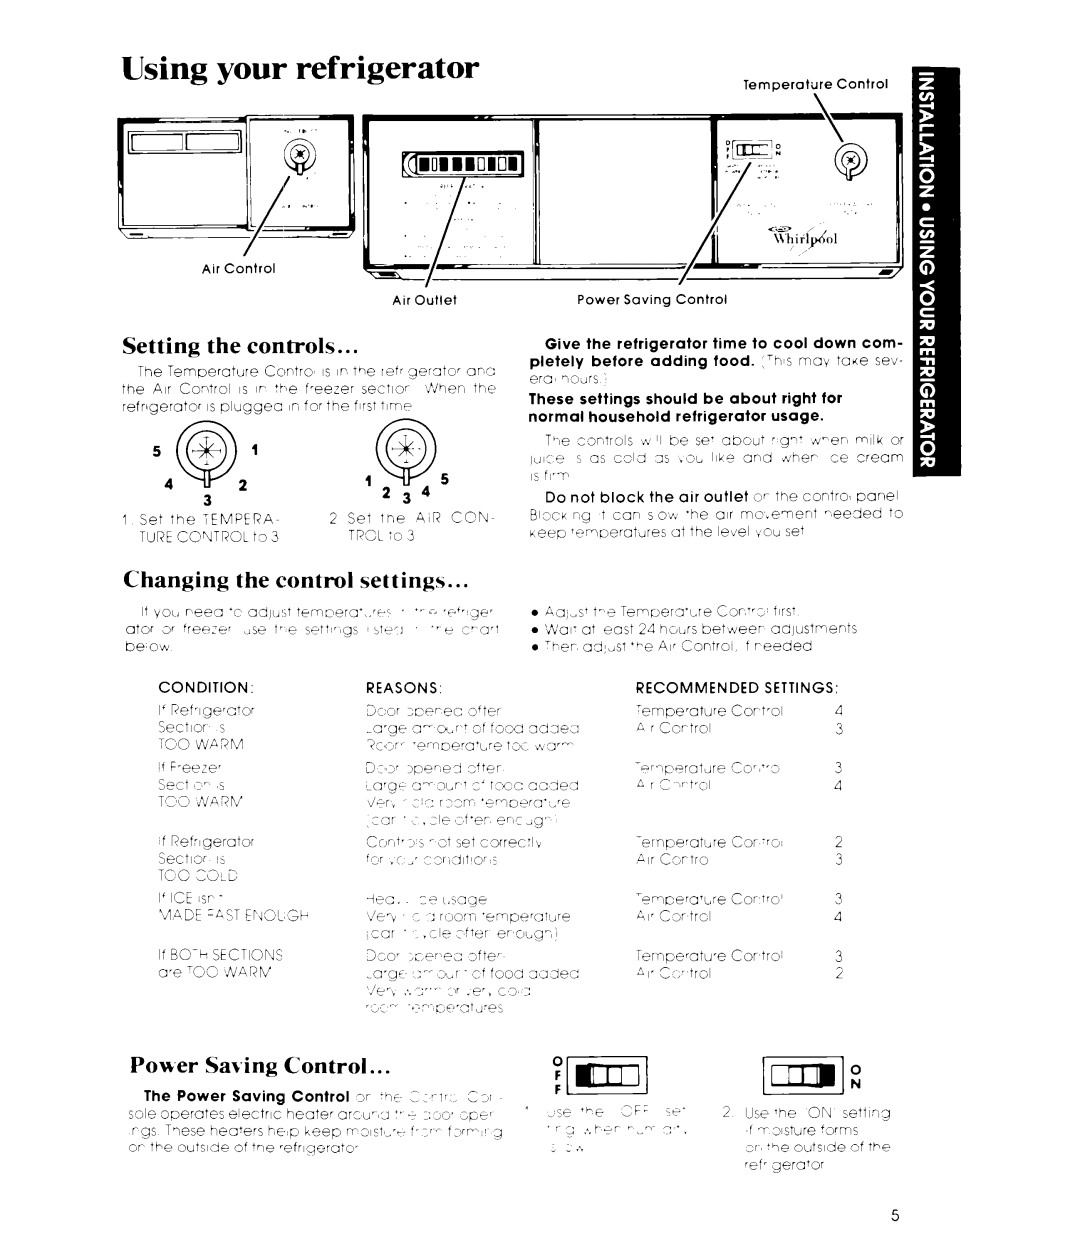 Whirlpool 3ED26MM manual Using your refrigerator, Setting, controls, Changing the control settings, Power Saying Control 